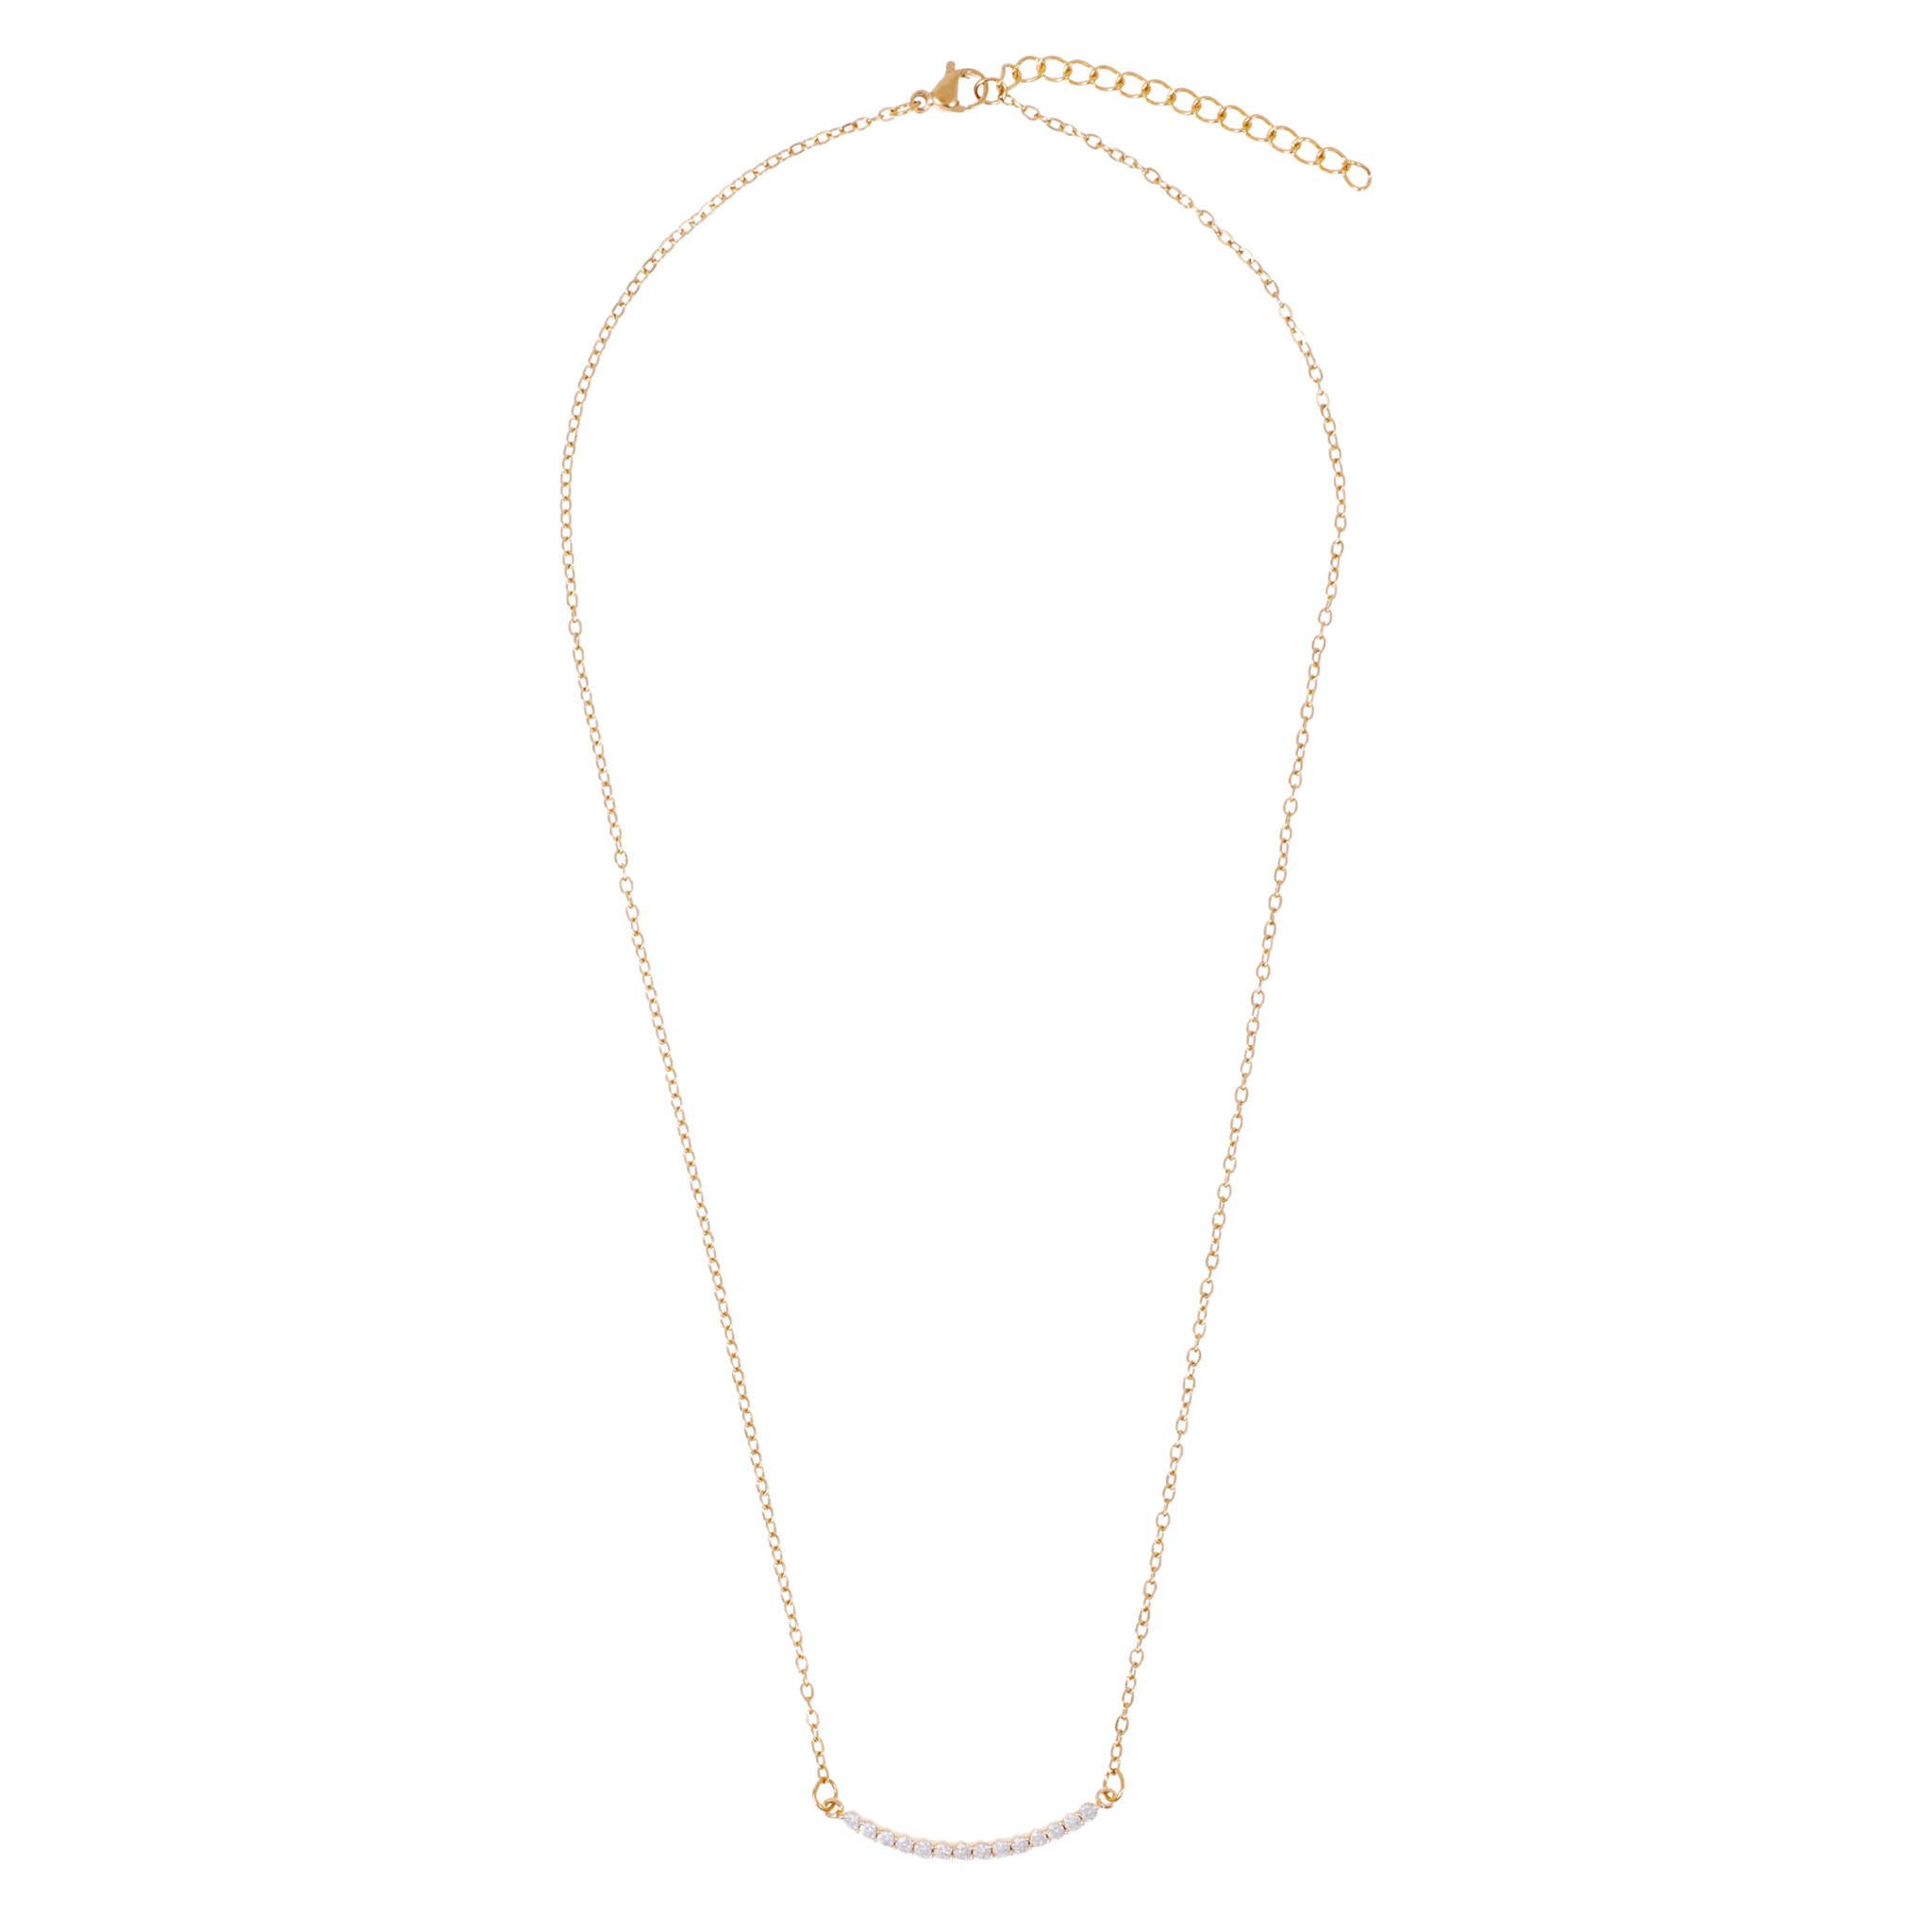 Ellie Vail Jewelry - Ellie Vail - Gianna Curved Bar Necklace